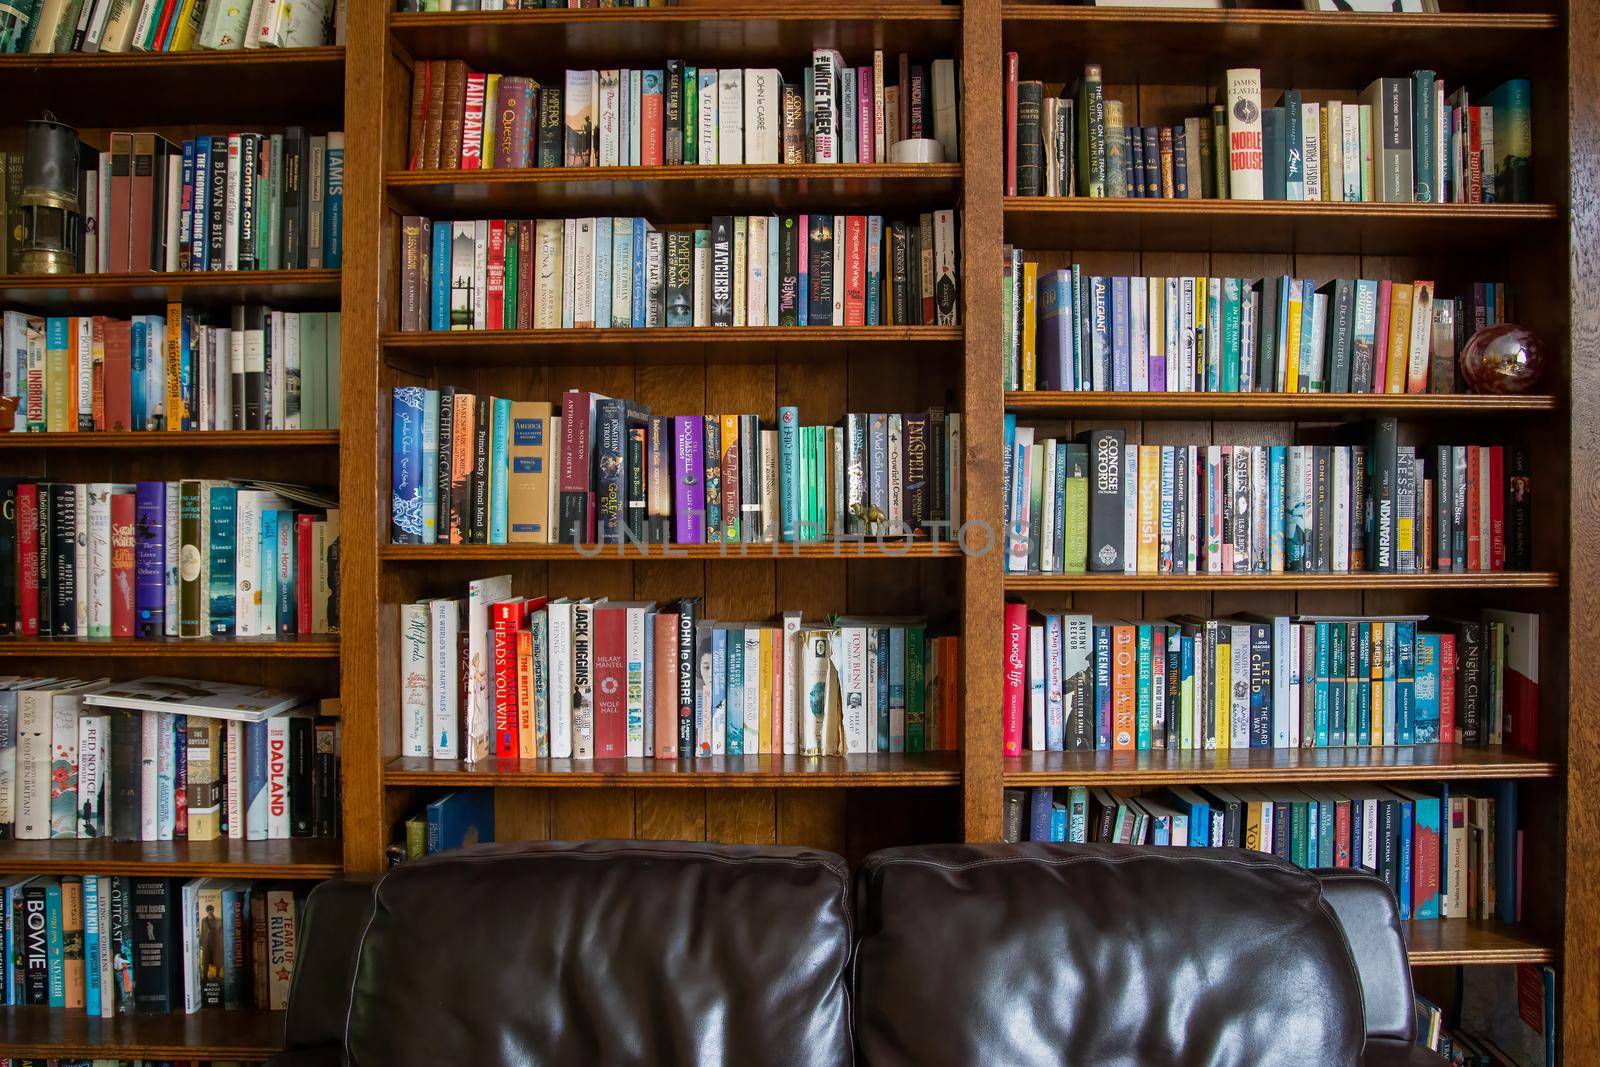 East Sussex, England - August 09 2020: Wooden bookcase filled with books in a UK home setting